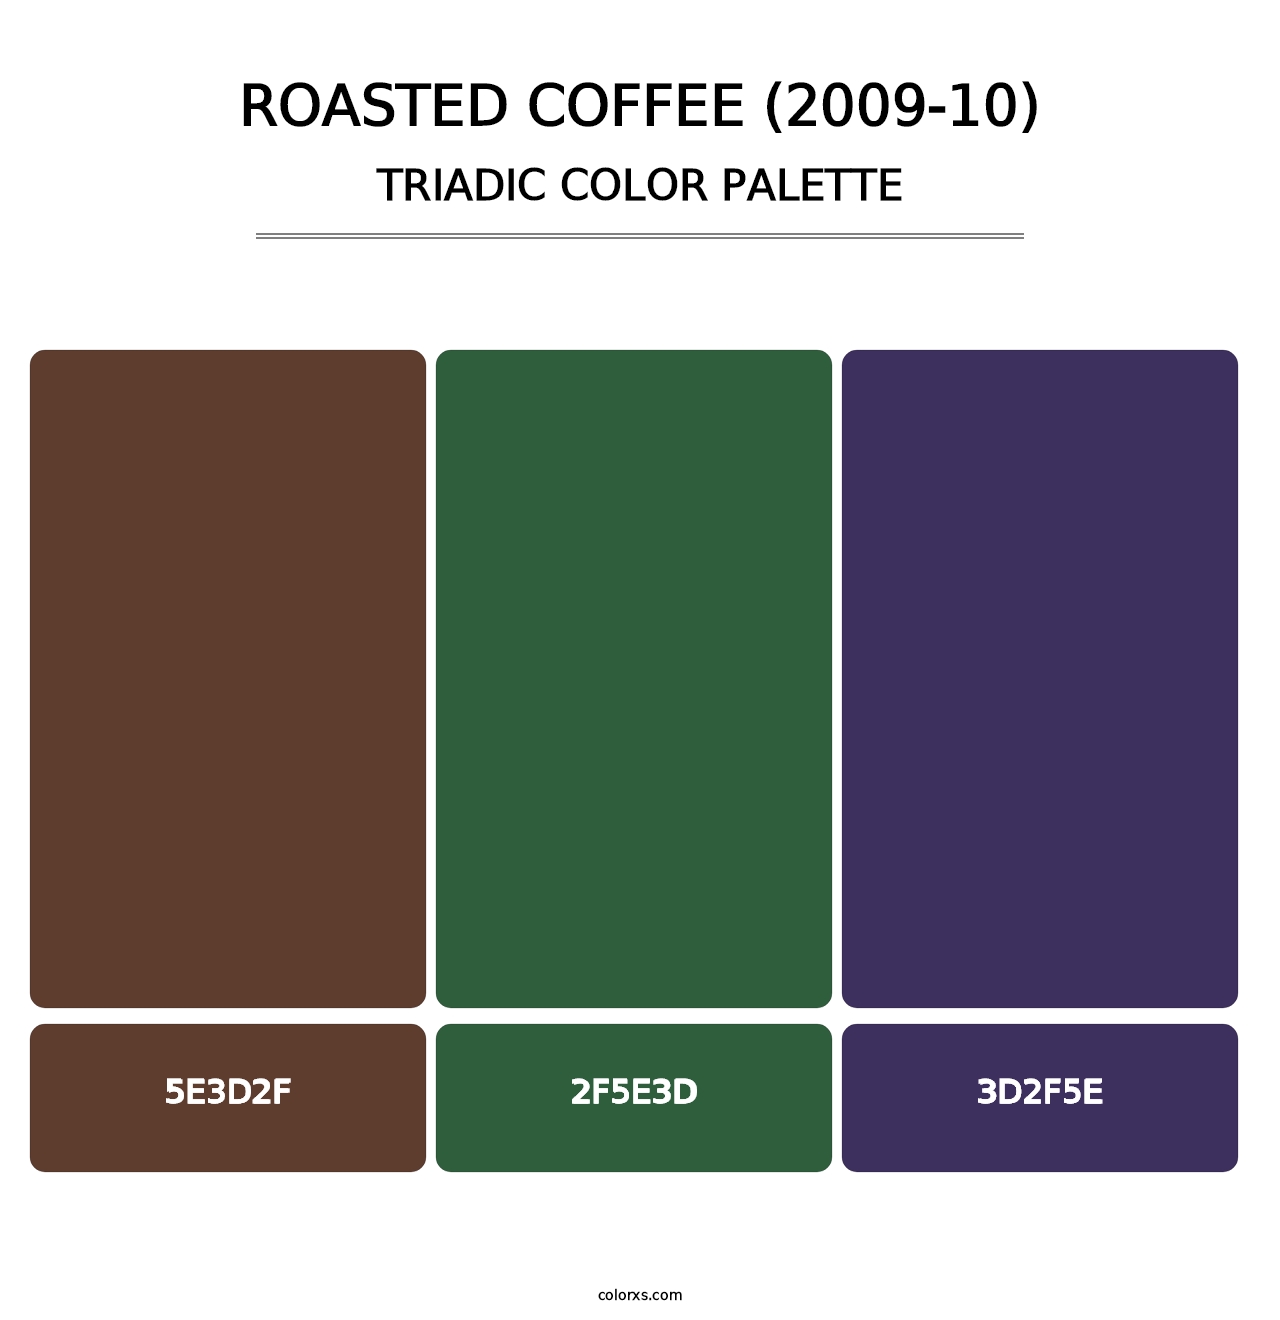 Roasted Coffee (2009-10) - Triadic Color Palette